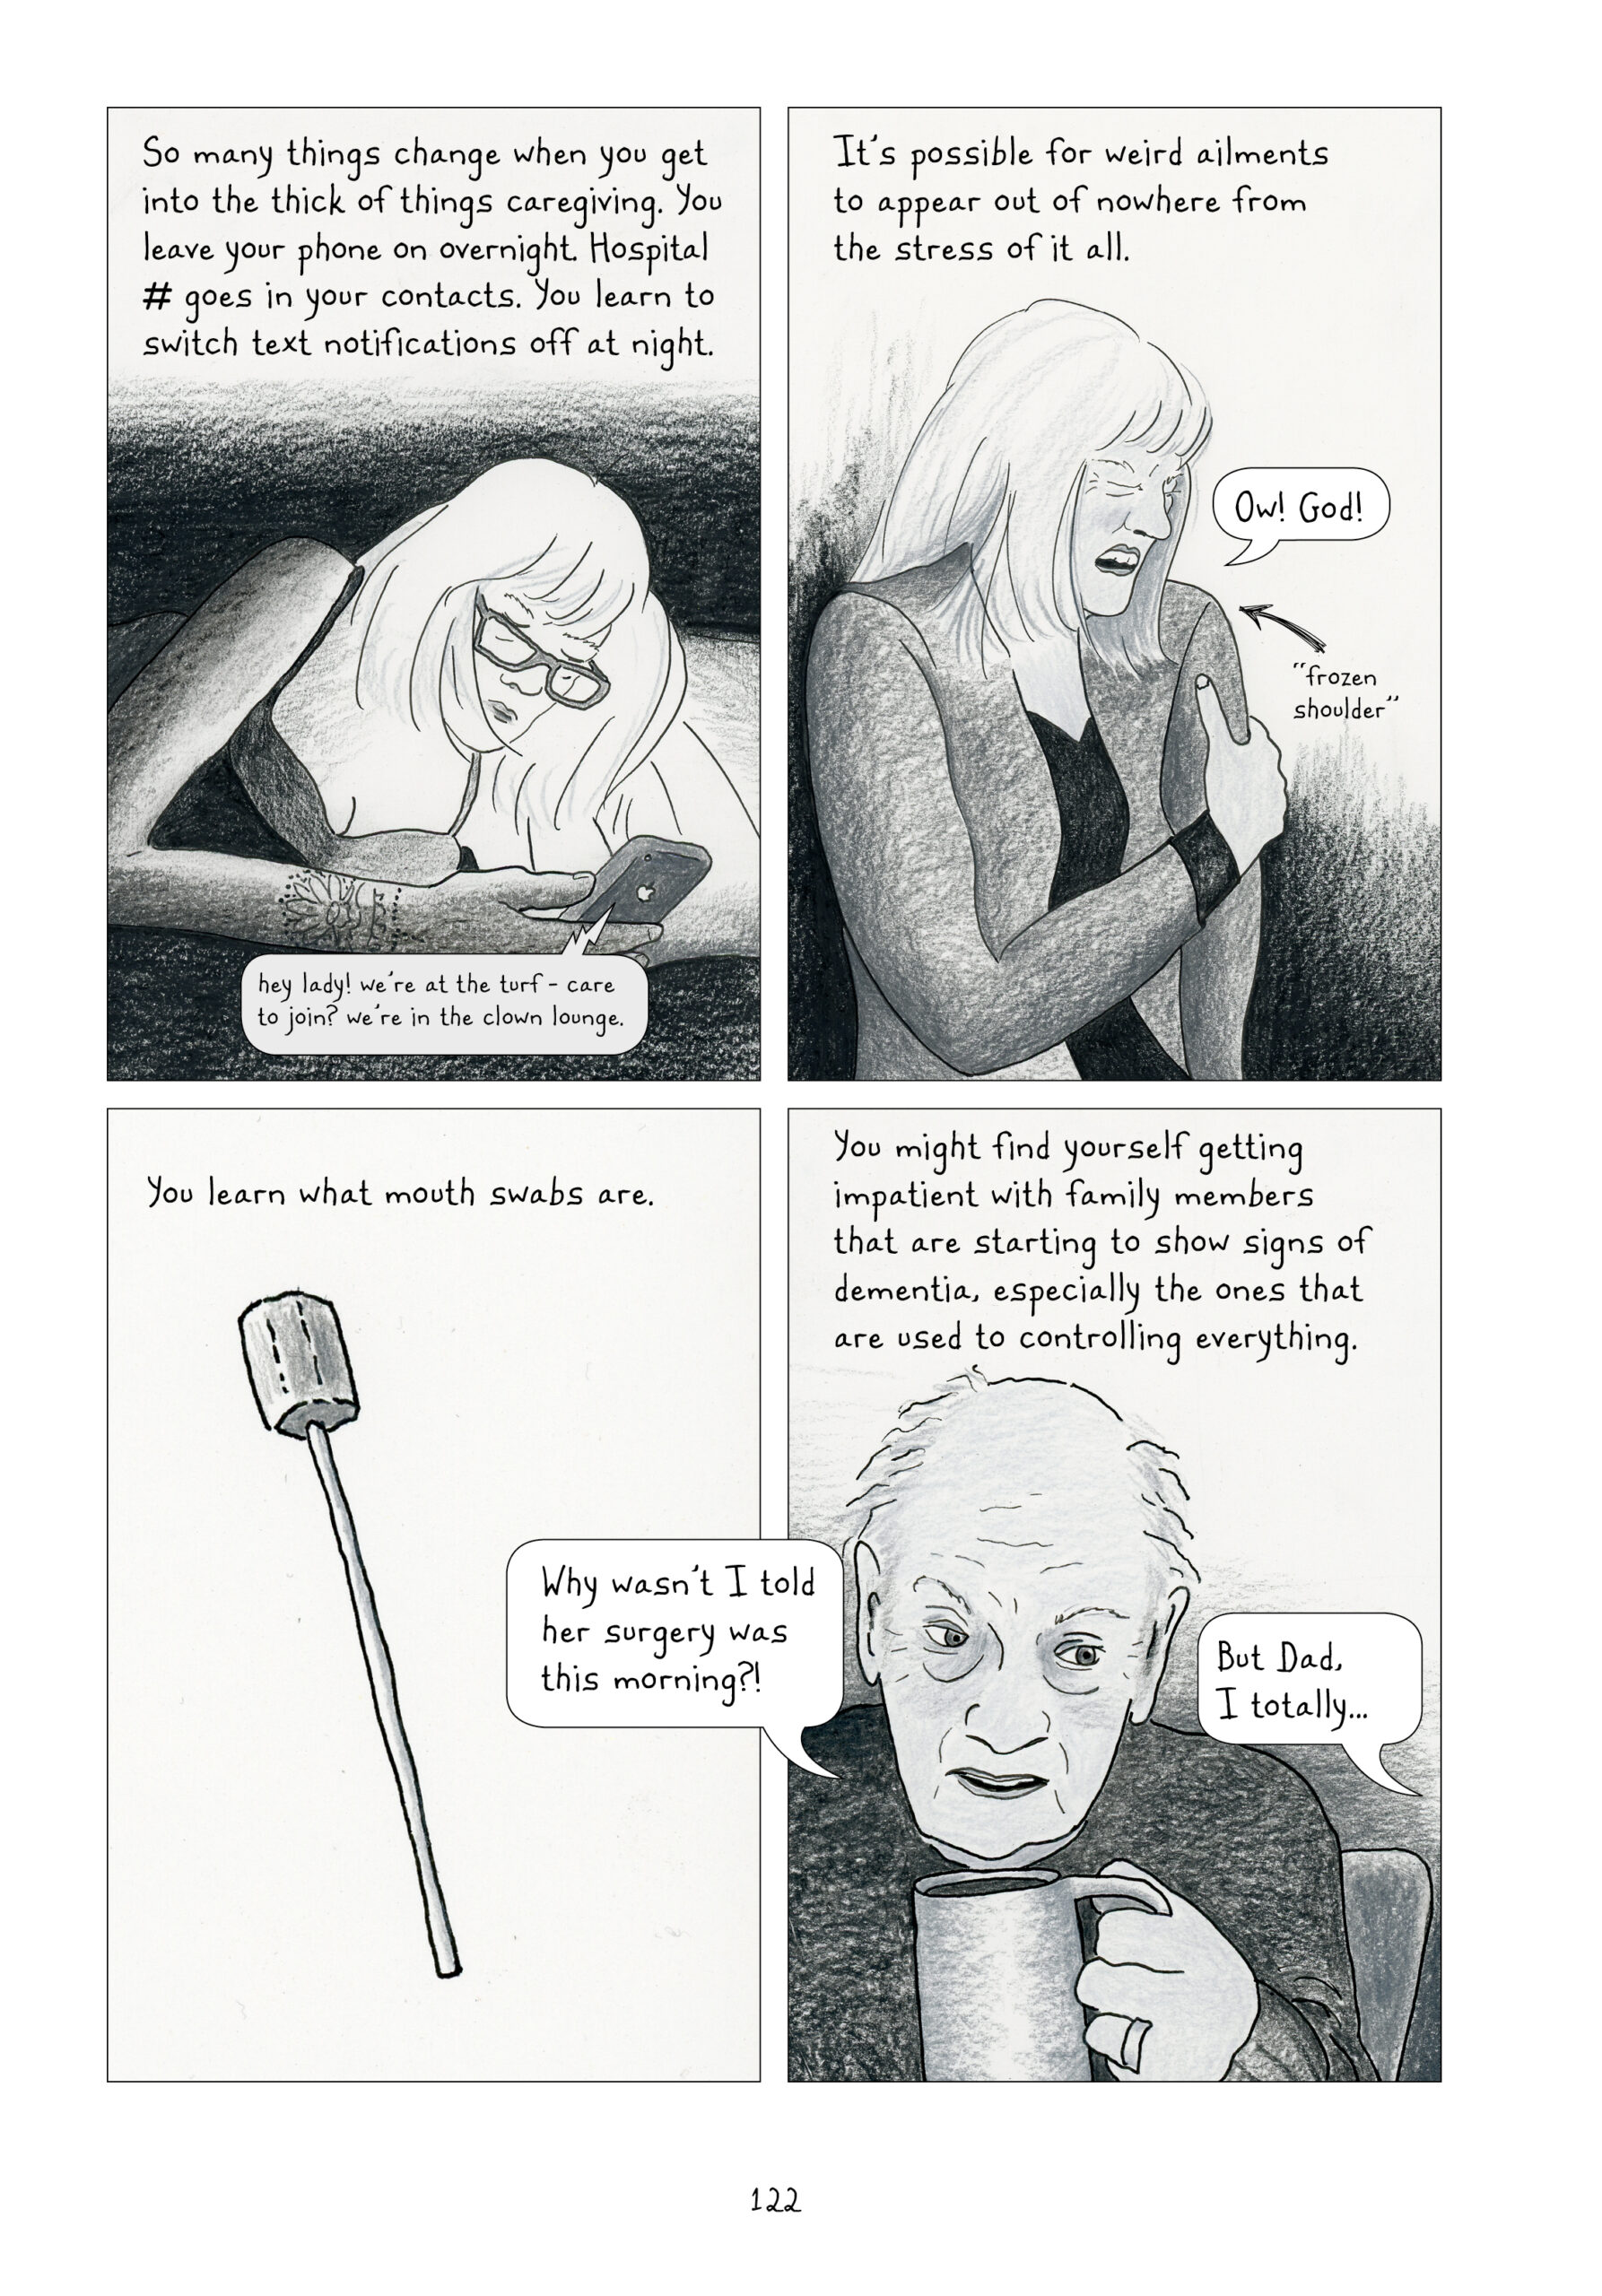 This page returns to entirely gray and white panels.

1. Lynn writes, â€œSo many things change when you get into the thick of things caregiving. You leave your phone on overnight. Hospital number goes in your contacts. You learn to switch text notifications off at night.â€ Lynn as an adult is in bed, lying on her side and propped up on her elbow looking at her phone. The light from the screen is the only in the room, blaring in Lynnâ€™s face. She is wearing glasses. She is reading a text that says, â€œhey lady! weâ€™re at the turf - care to join? weâ€™re in the clown lounge.â€
2. â€œItâ€™s possible for weird ailments to appear out of nowhere from the stress of it all.â€ Lynn is leaning against a wall clutching her shoulder and grimacing in pain. She calls out, â€œOw! God!â€ She labels with an arrow that she is experiencing â€œfrozen shoulder.â€
3. â€œYou learn what mouth swabs are.â€ A large cotton swab, that resembles a marshmallow on a stick more than a Q-tip, takes up the panel. The background is blank.â€ Dialogue from the next panel bleeds into this one.
4. Lynn continues narrating, â€œYou might find yourself getting impatient with family members that are starting to show signs of dementia, especially the ones that are used to controlling everything.â€ Lynnâ€™s dad, mostly bald and looking upset, asks, â€œWhy wasnâ€™t I told her surgery was this morning?â€ (This quote bubble overlaps the last panel.) From off-panel, Lynn responds, â€œBut. Dad, I totallyâ€¦â€